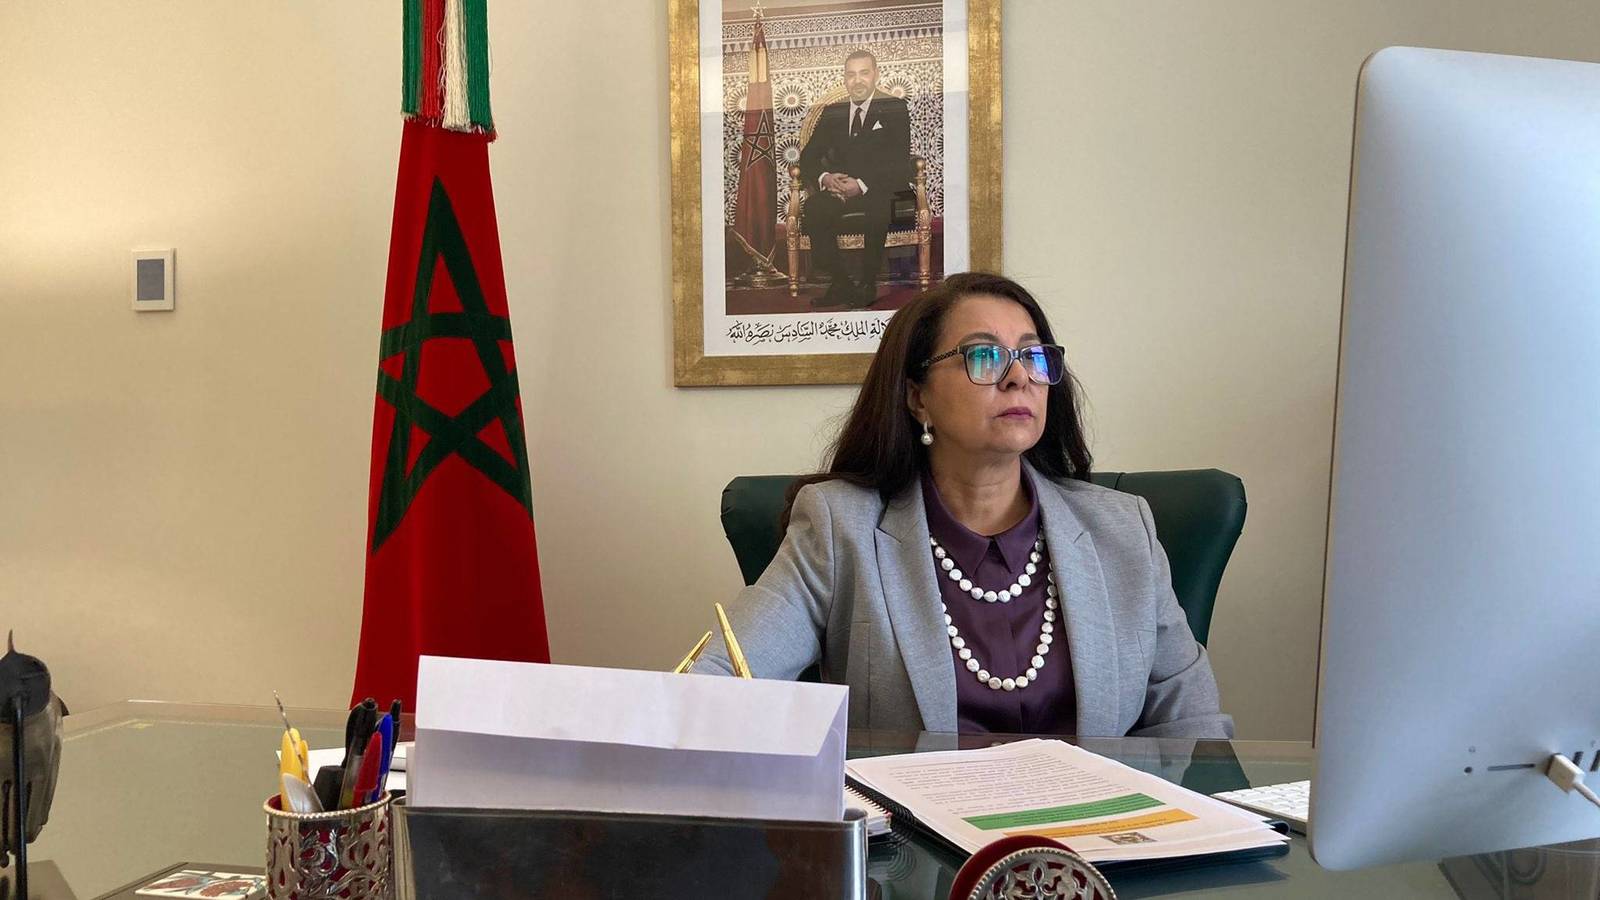 Spain has undermined neighborliness, mutual respect- Morocco says